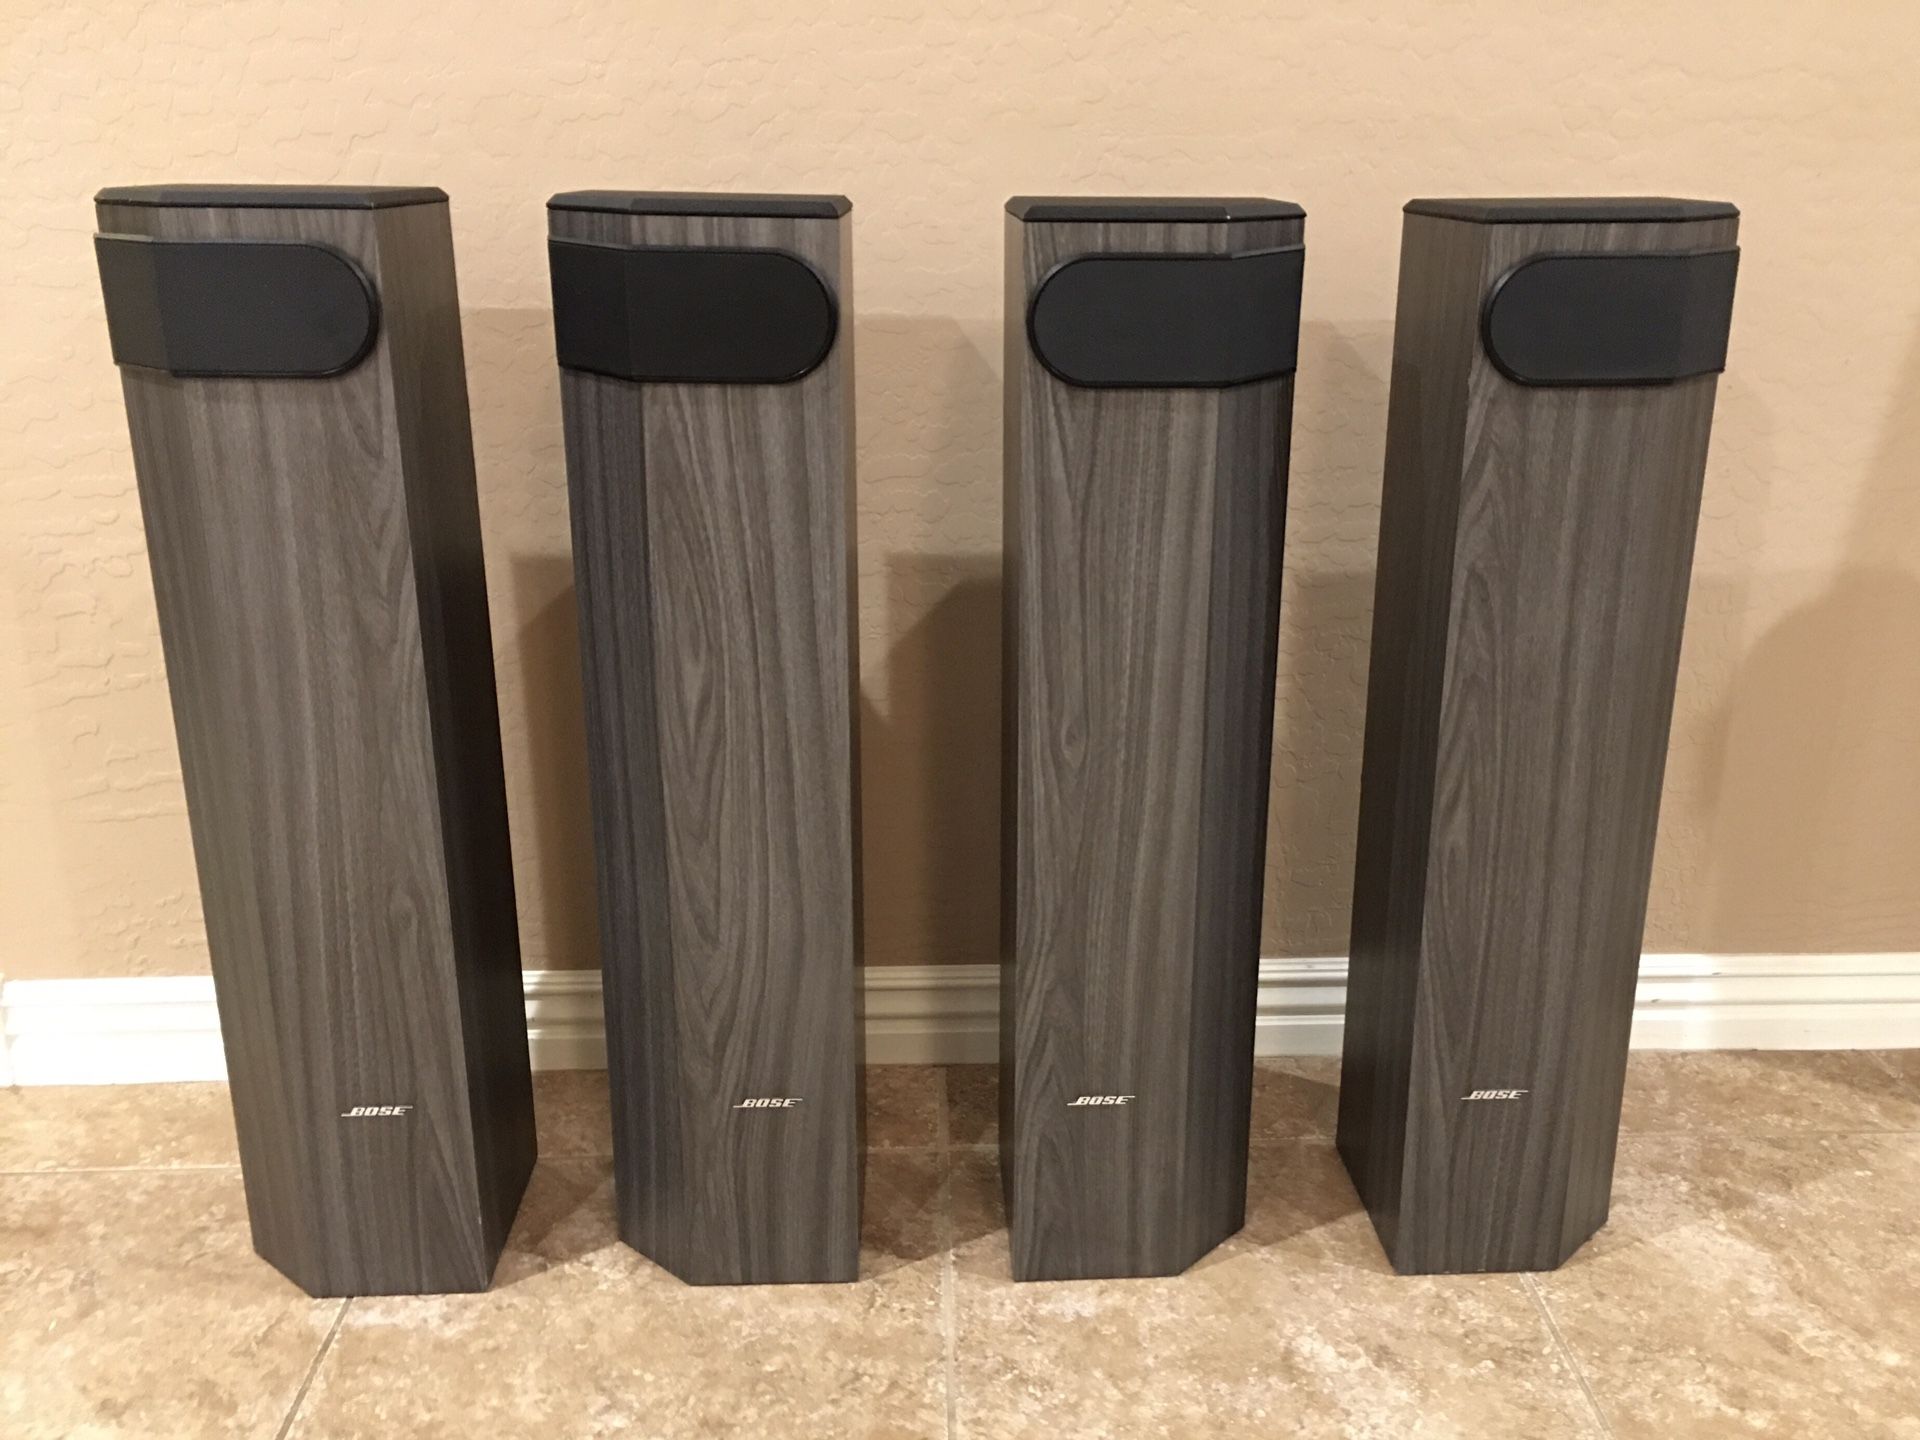 PENDING: Bose 501 Series-5 Direct/Reflective Stereo Speakers - Excellent Condition!!